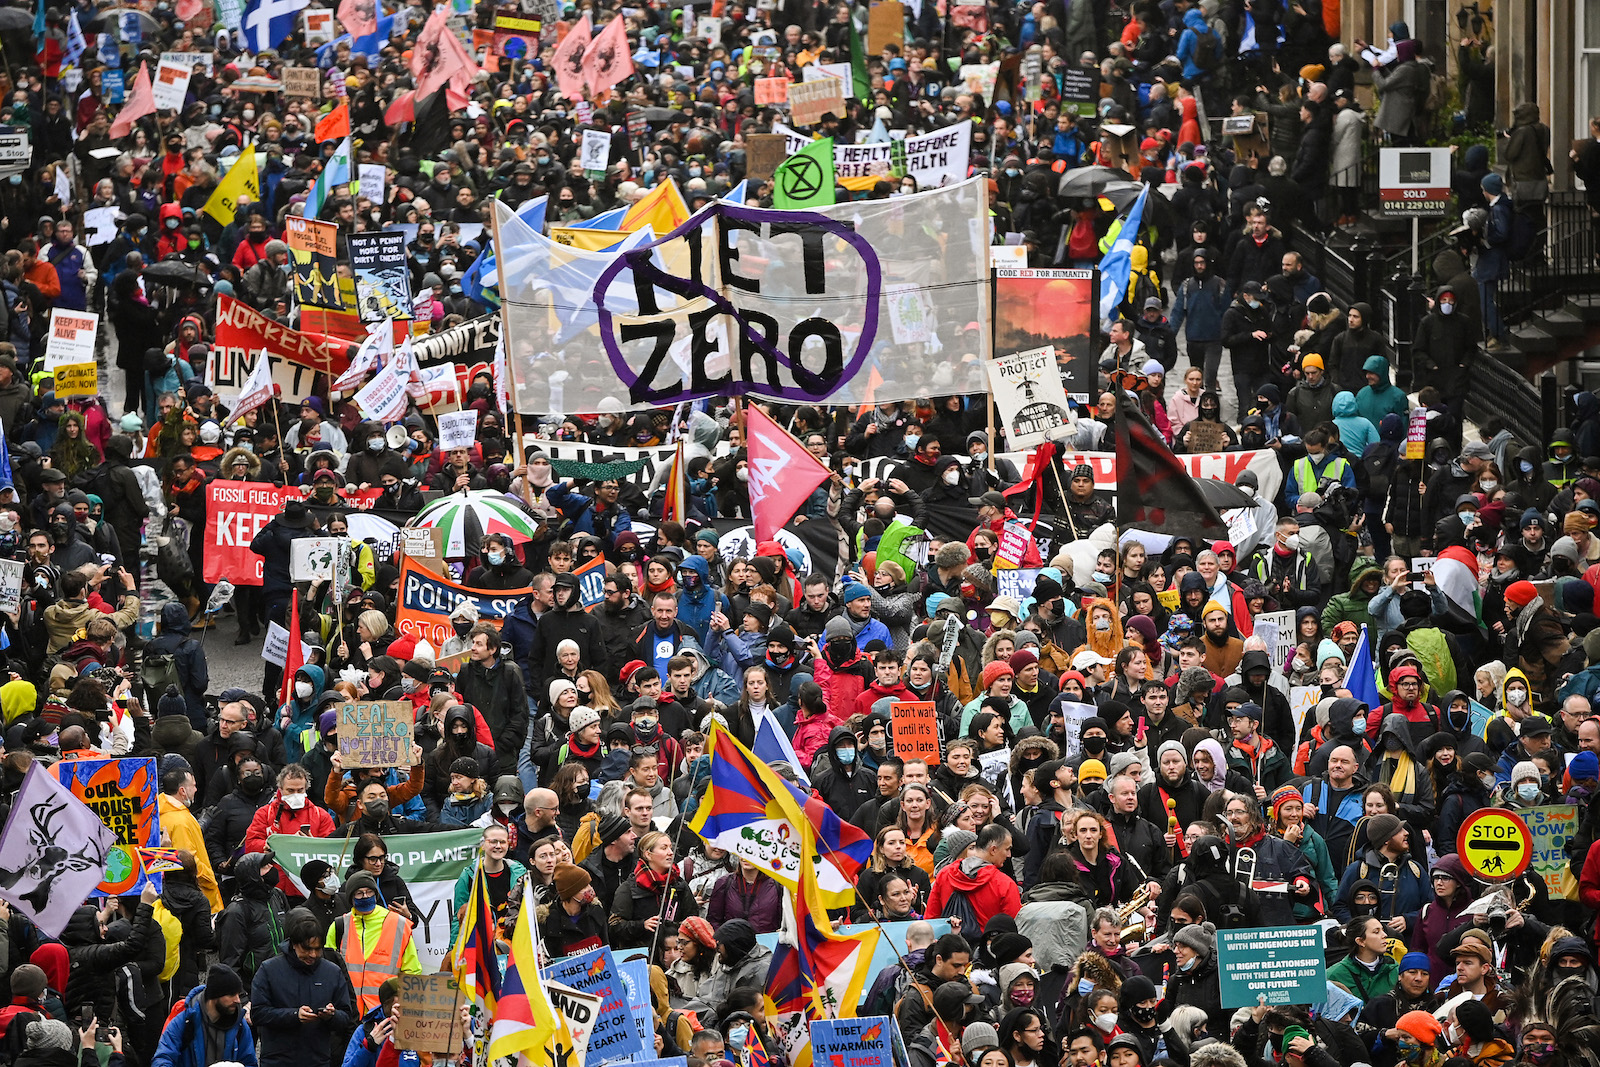 a large crowd of marchers with some holding a large sign with net zero inside a slashed circle